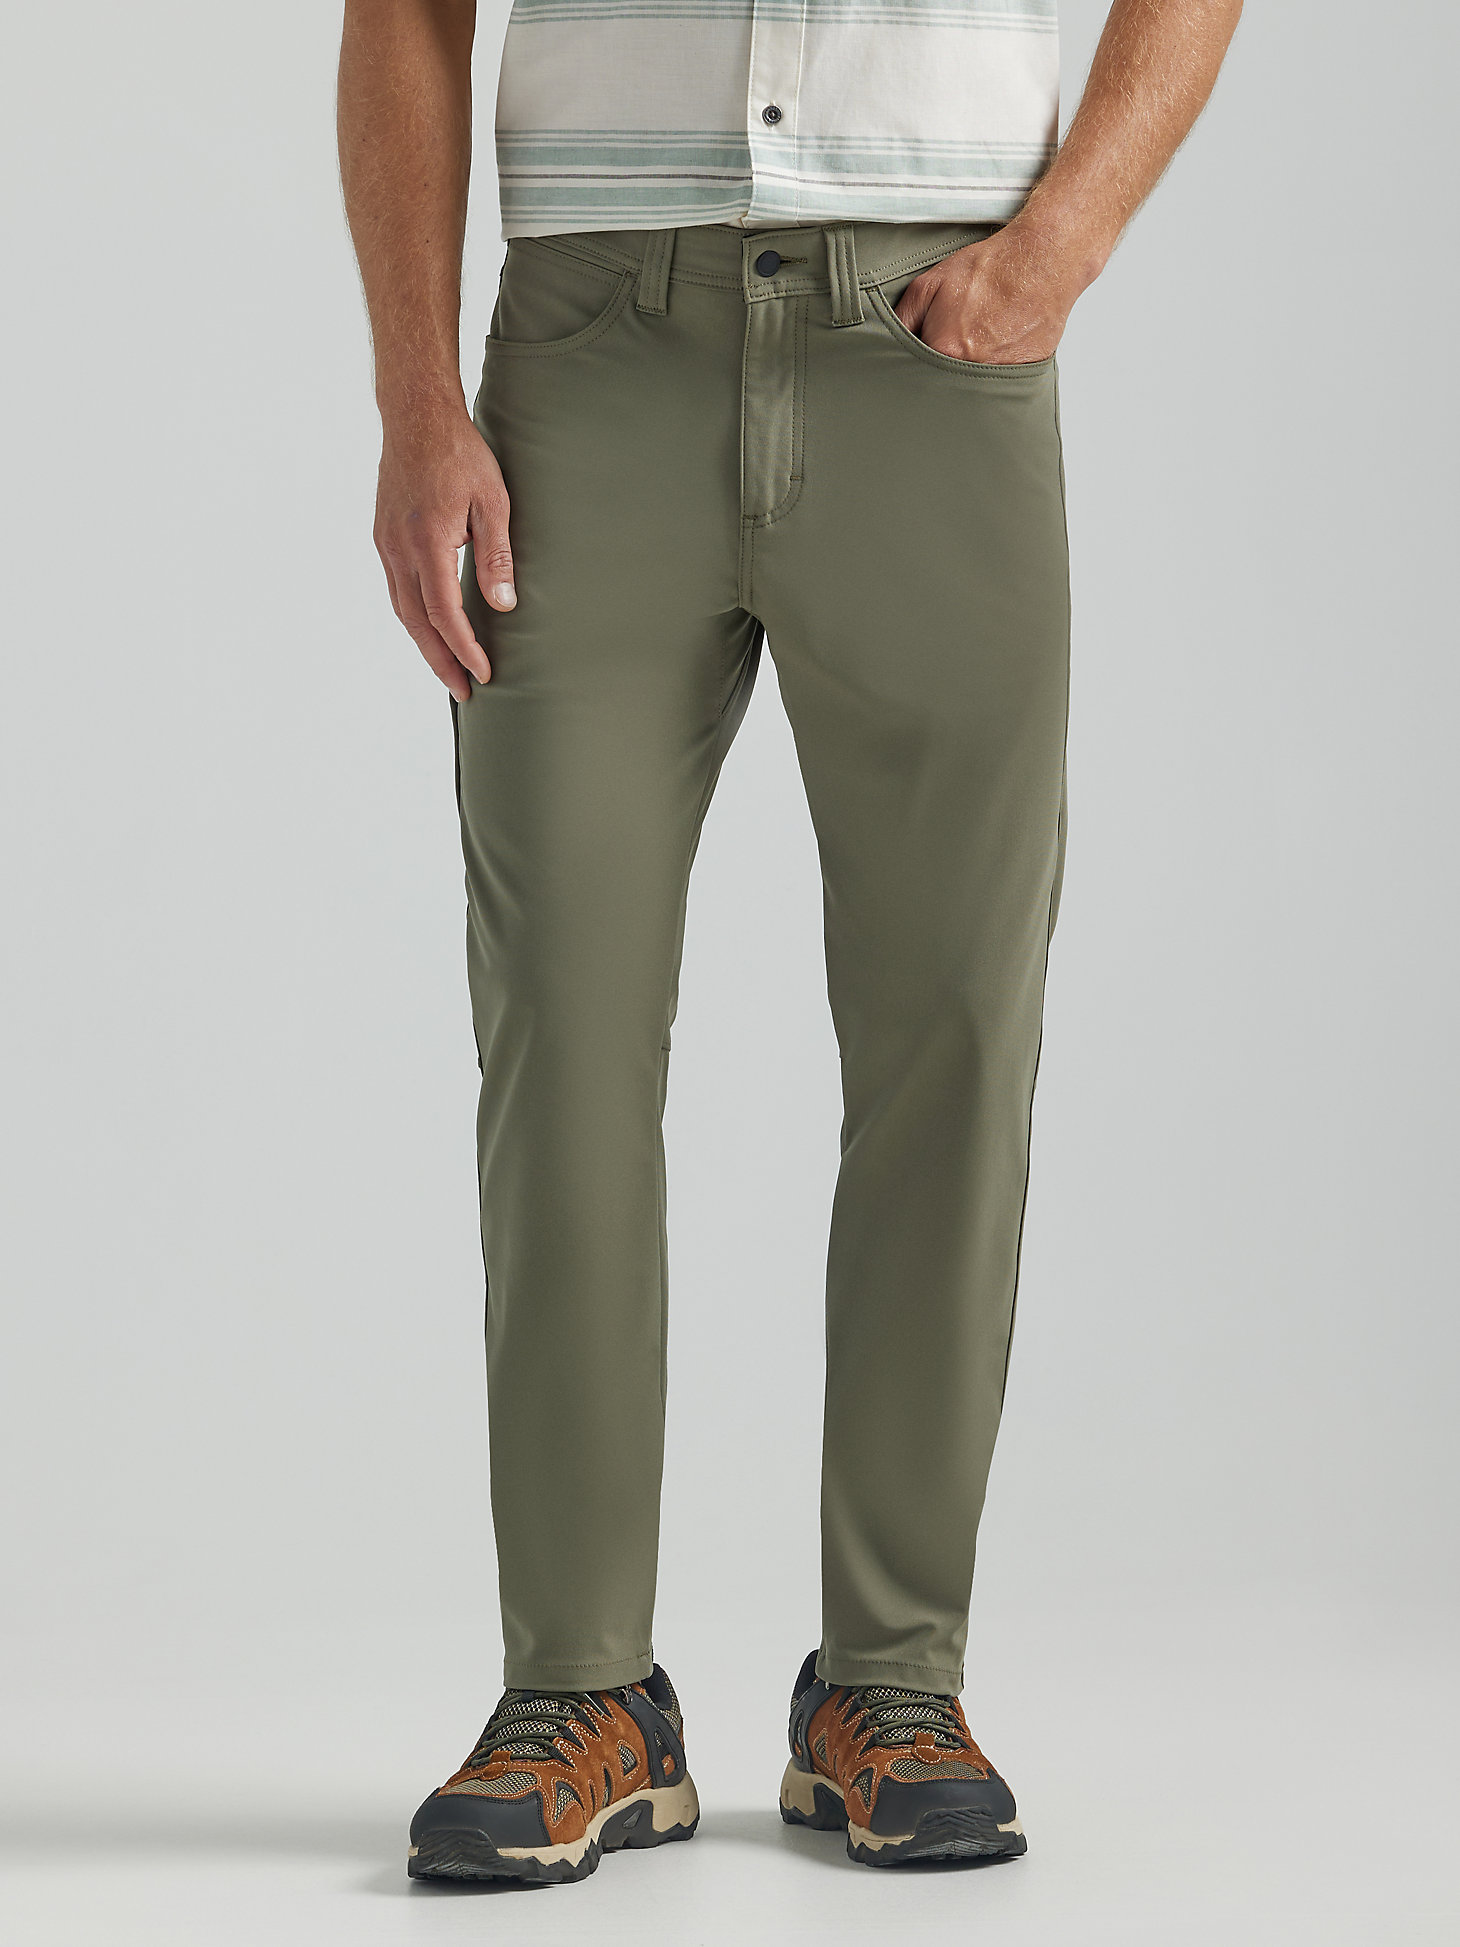 All Terrain Gear Fwds 5 Pocket Pant in Dusty Olive main view